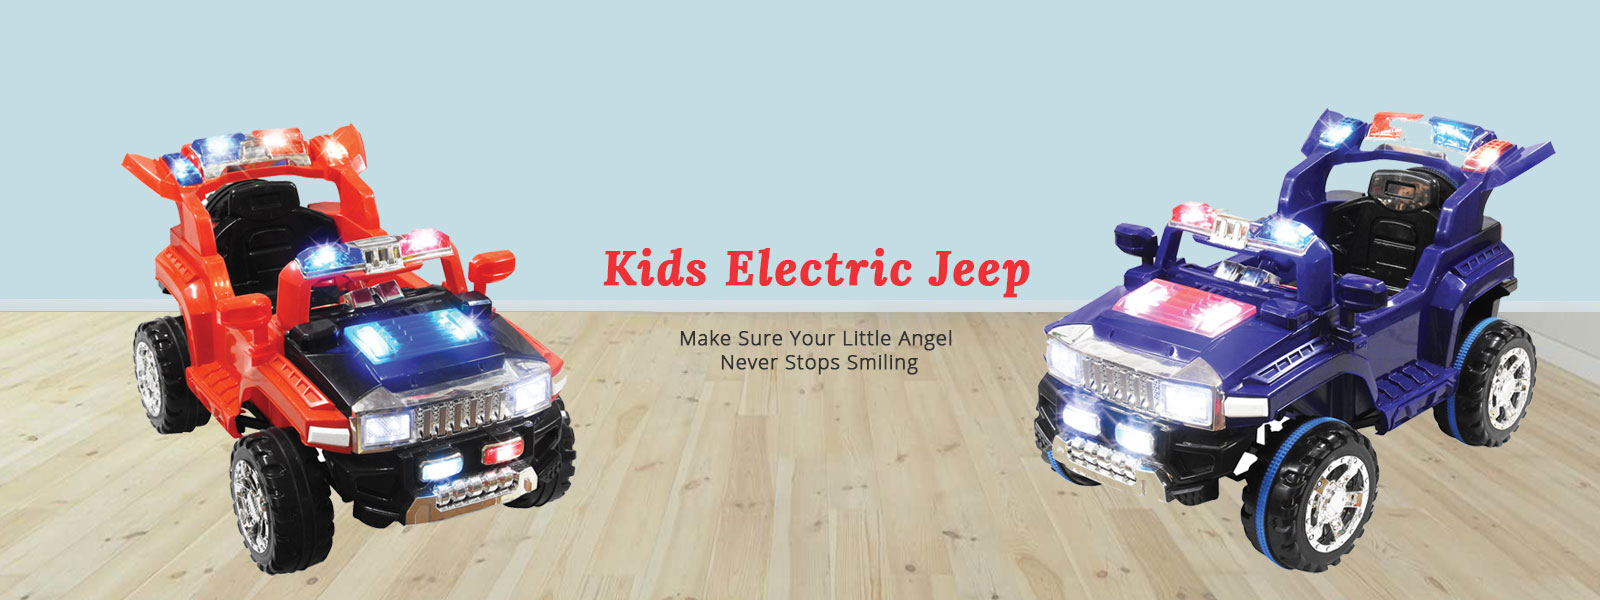 Kids Electric Jeep Manufacturers in Gwalior